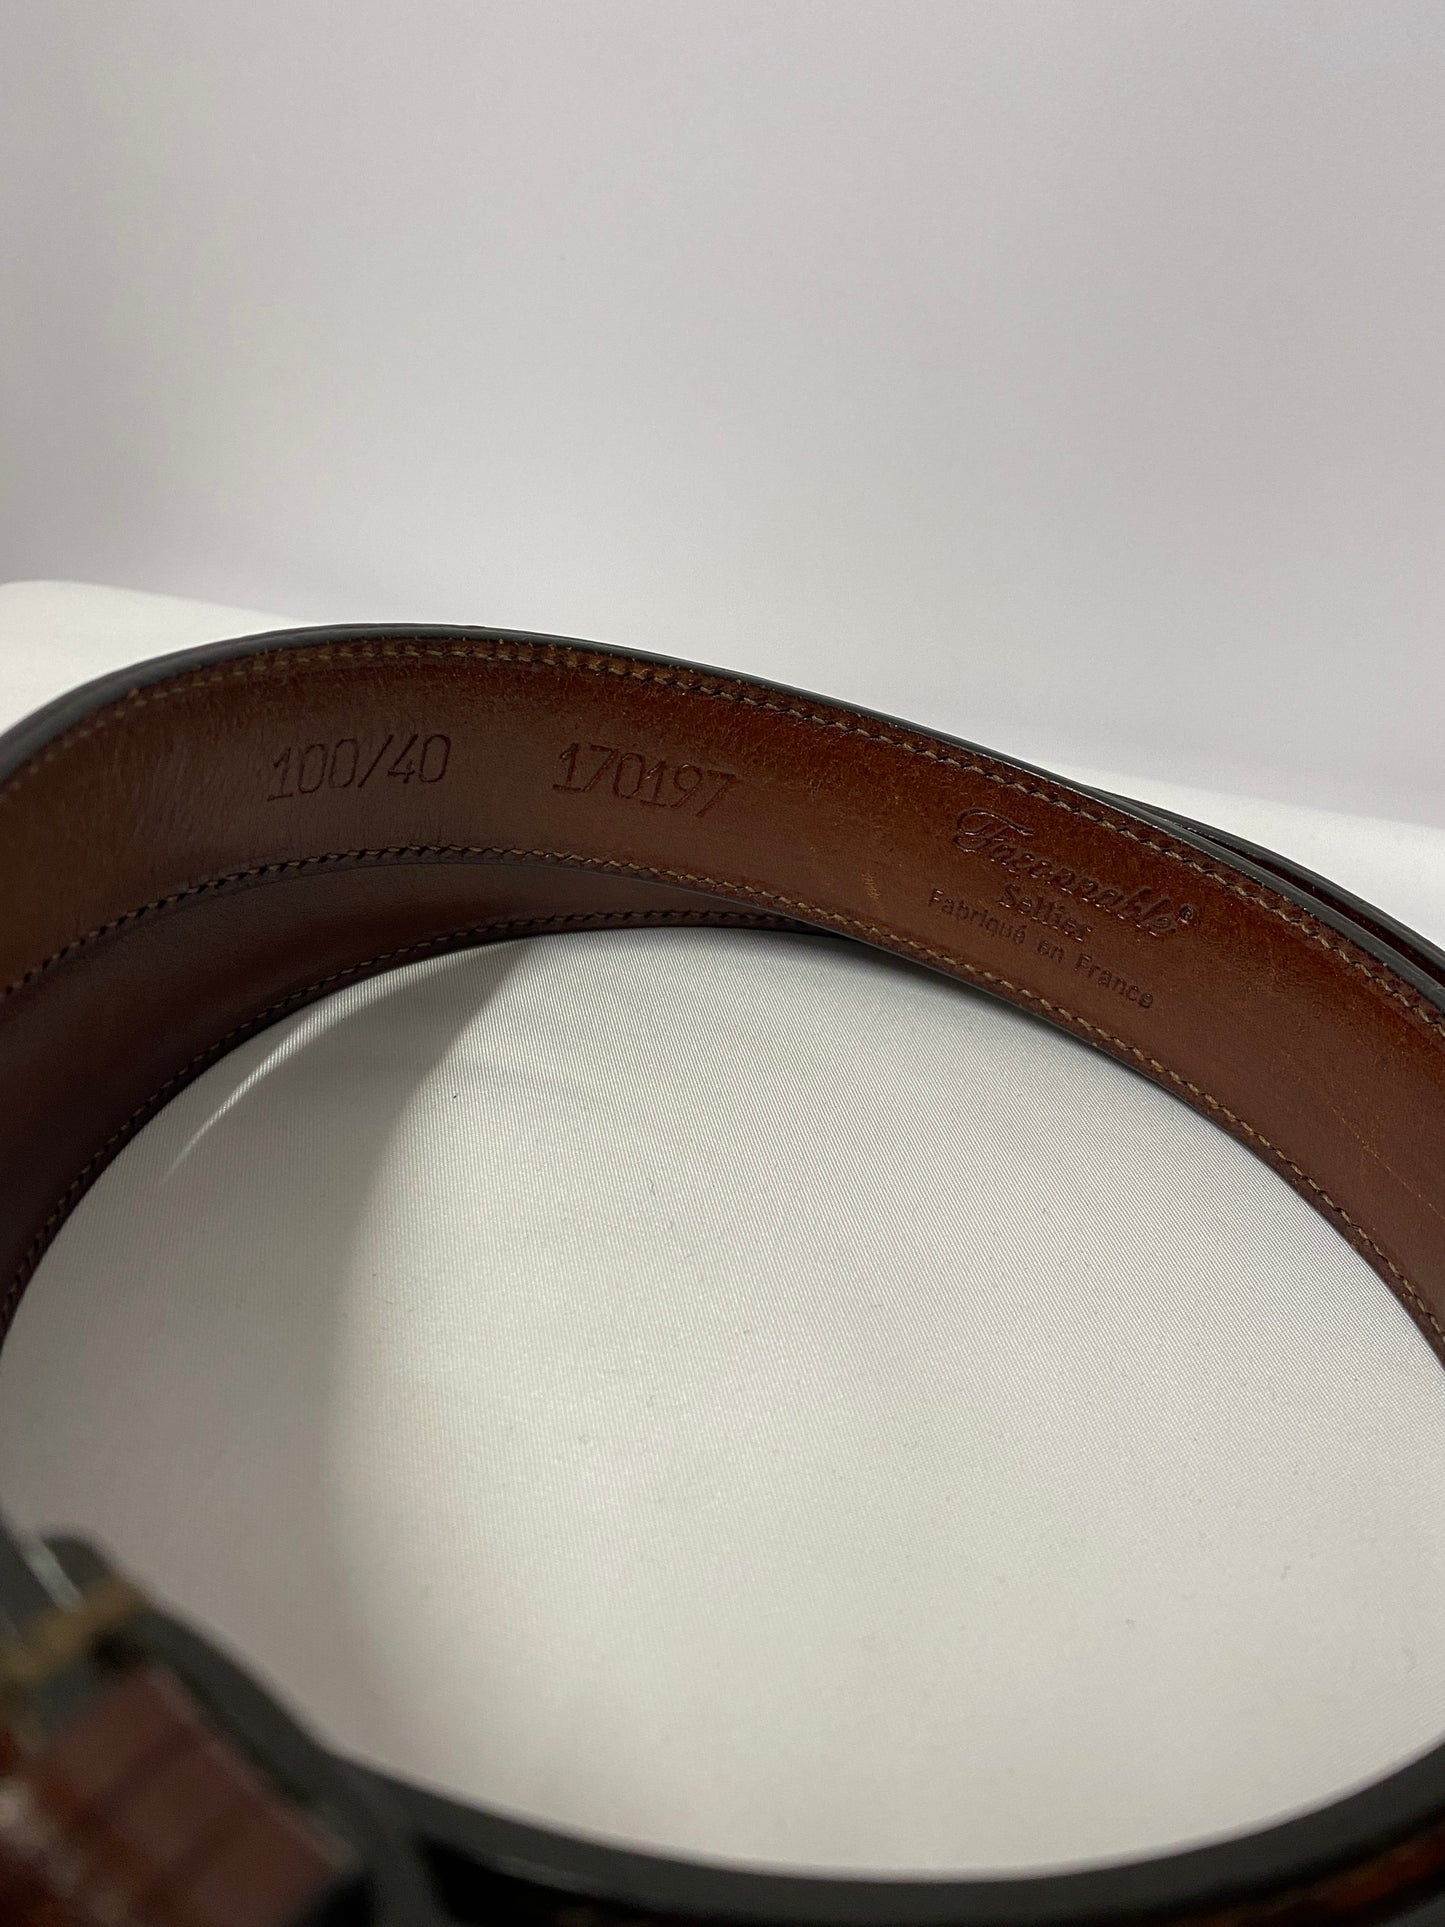 Faconnable Brown Leather belt 40